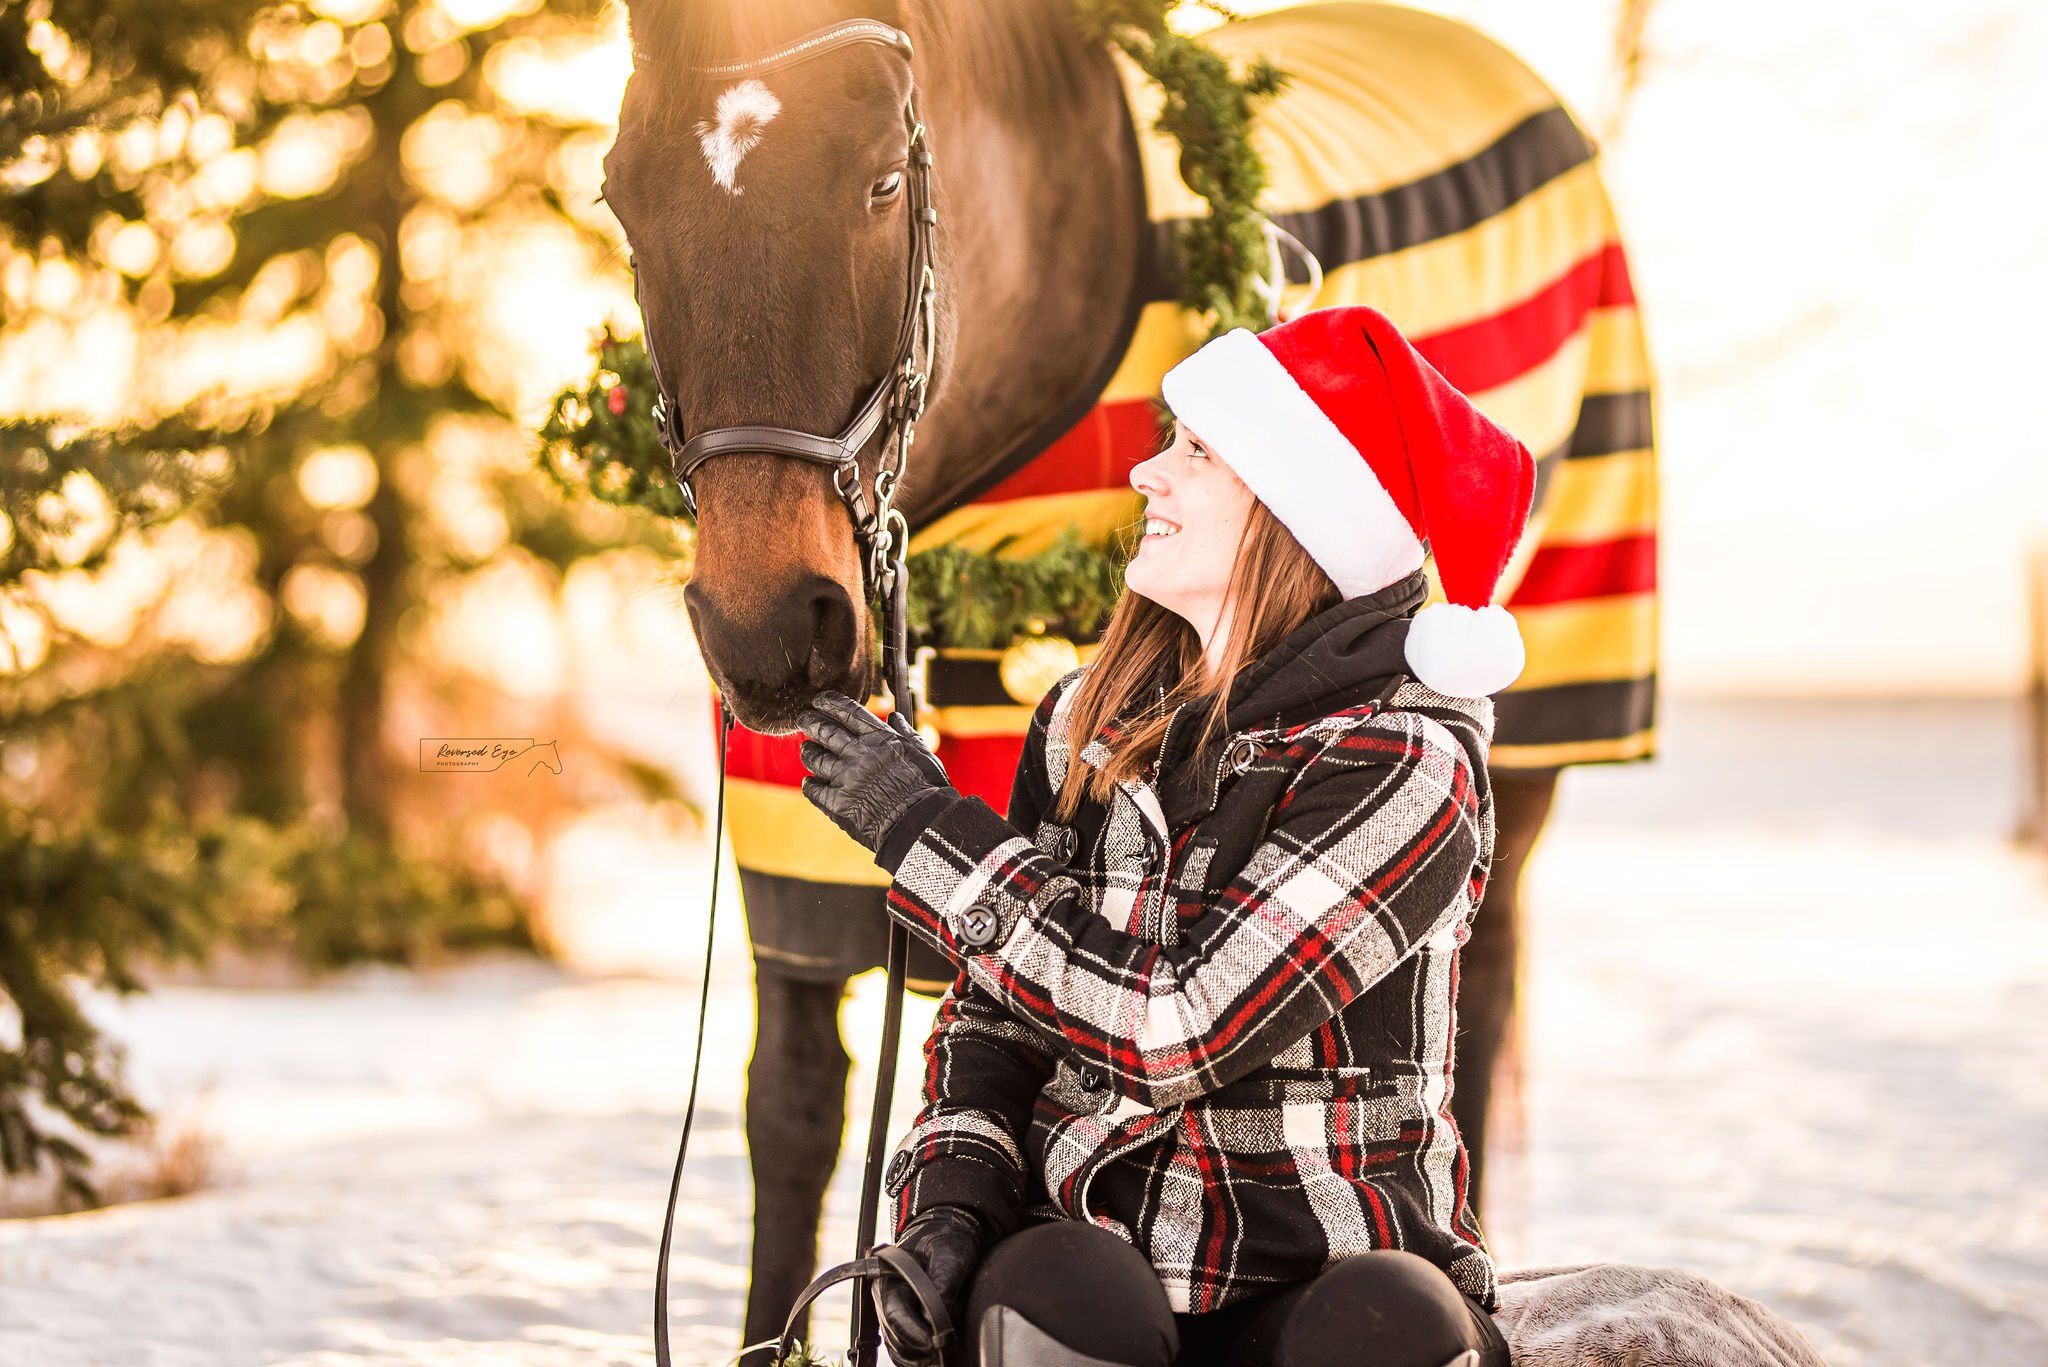 Winter Equestrian Photography